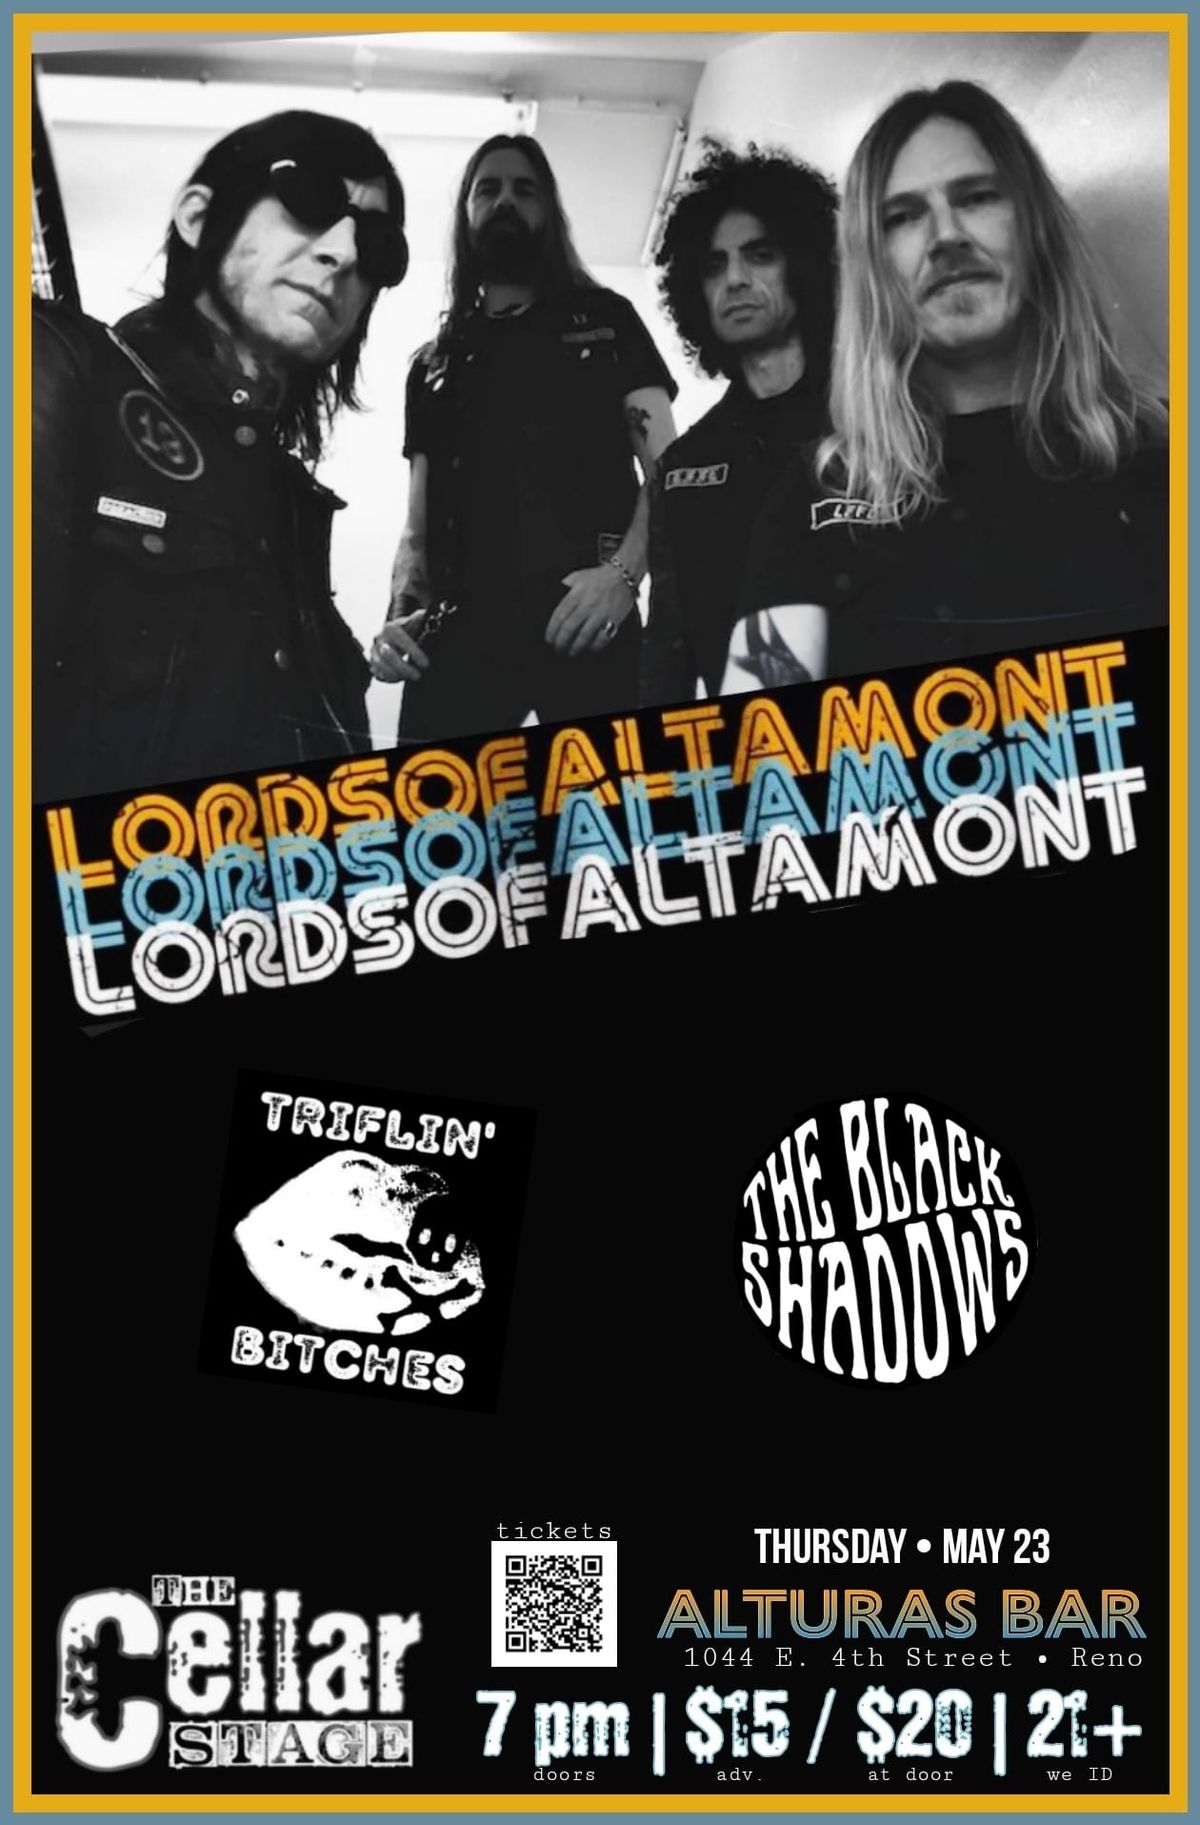 The LORDS OF ALTAMONT Triflin' Bitches & The Black Shadows 